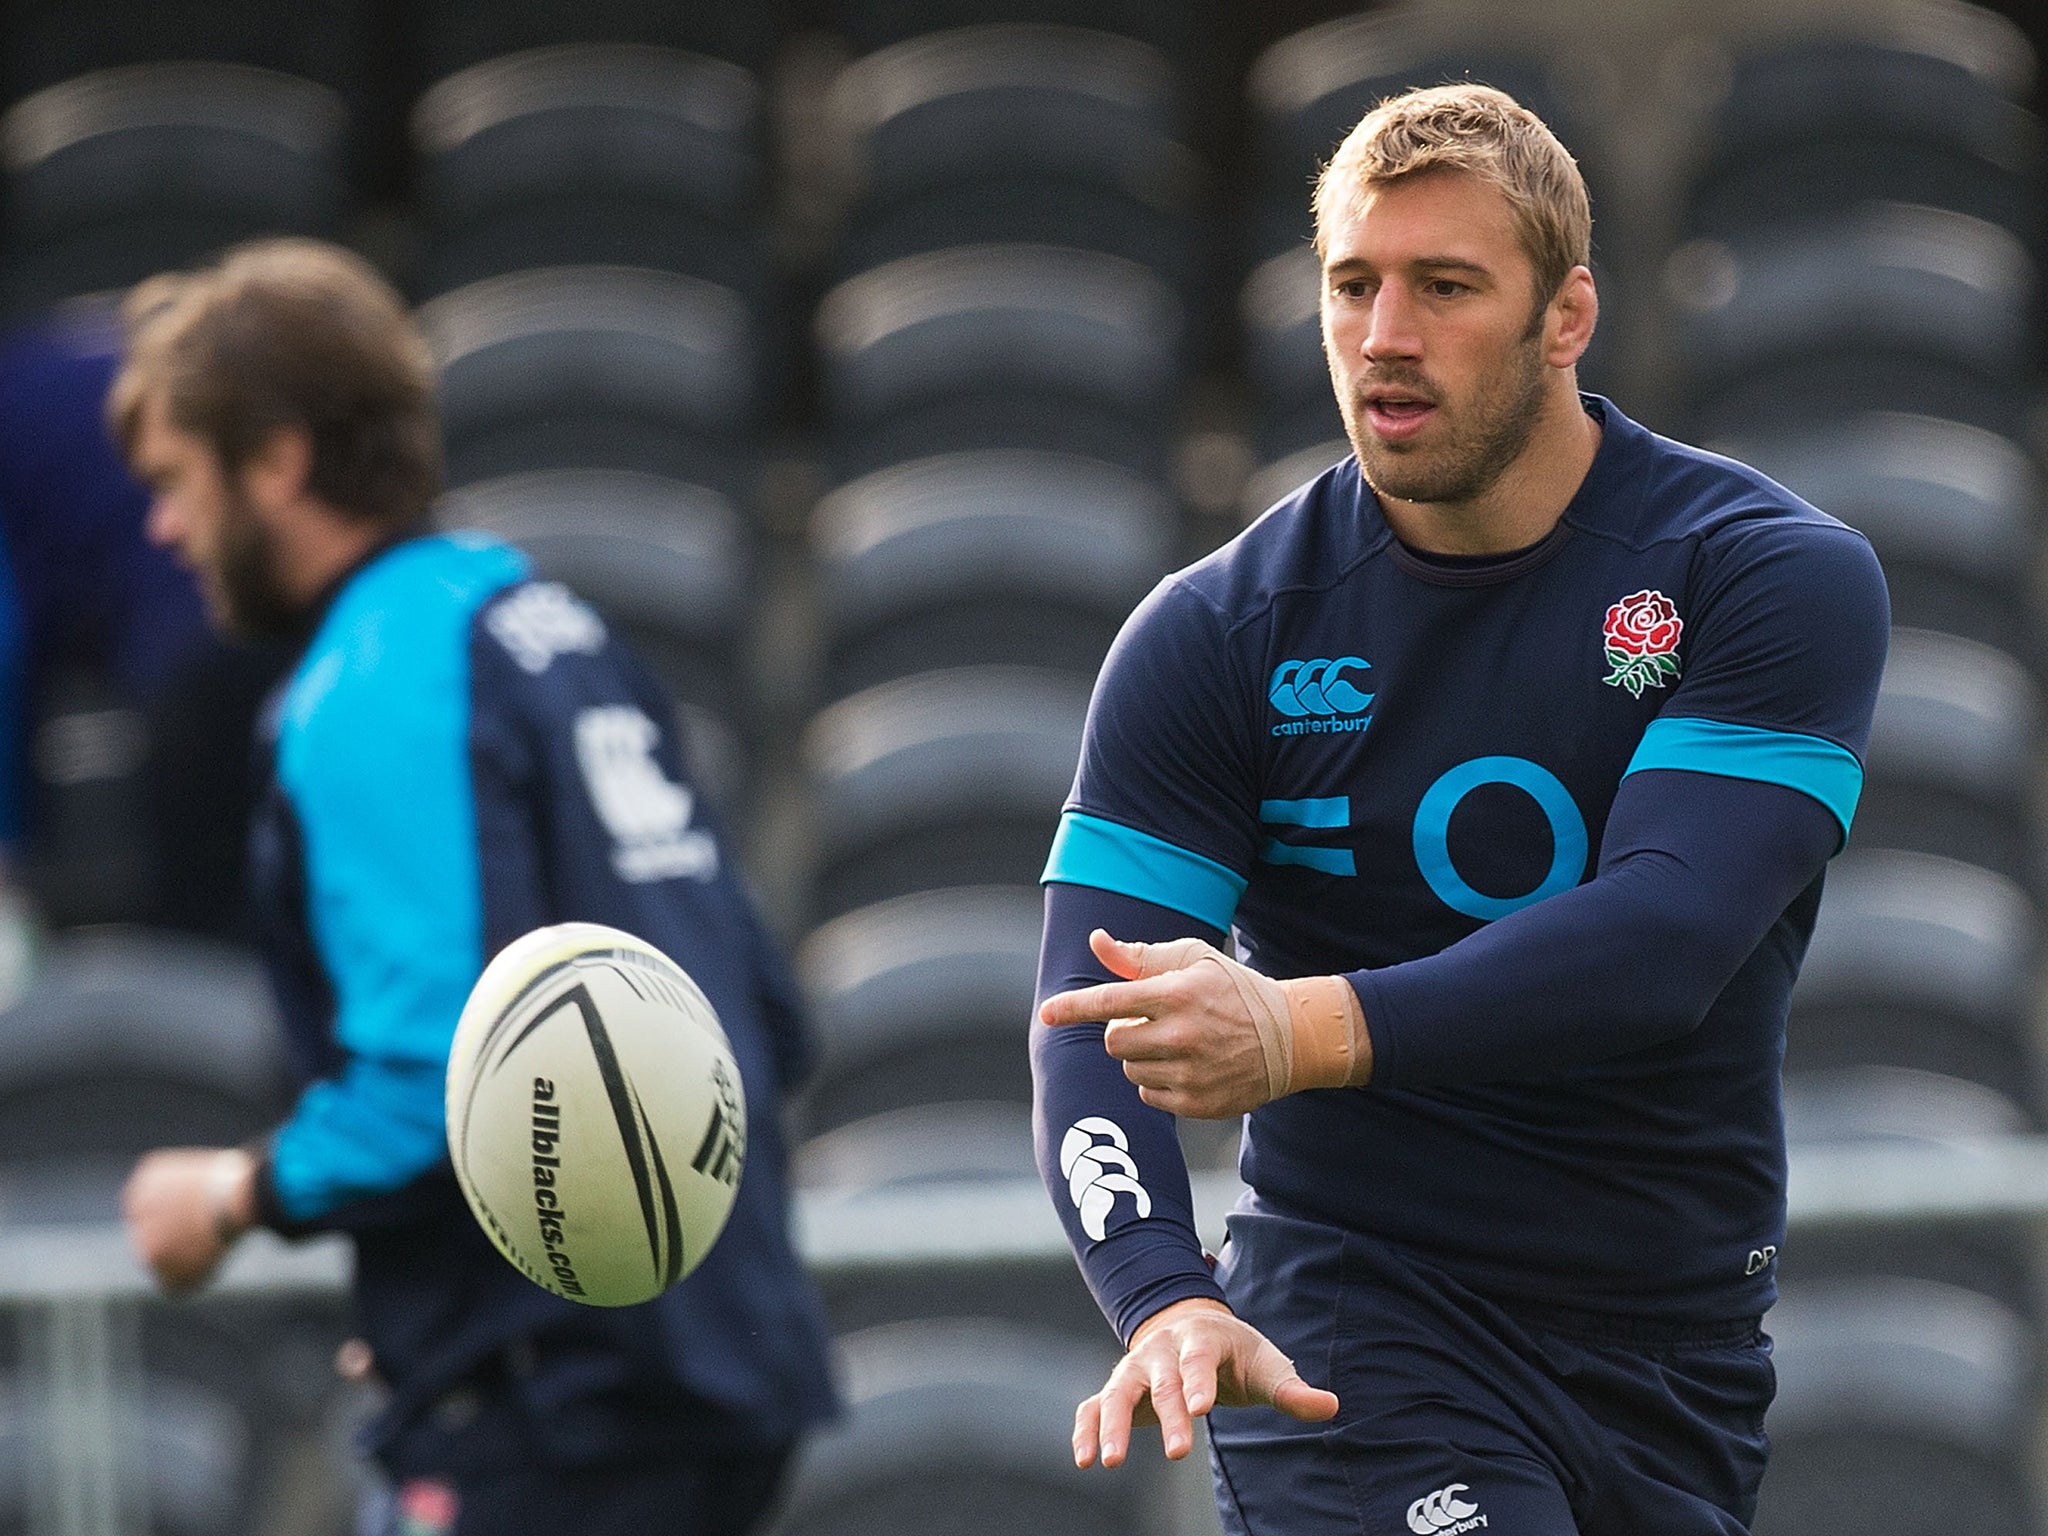 England captain Chris Robshaw warms up